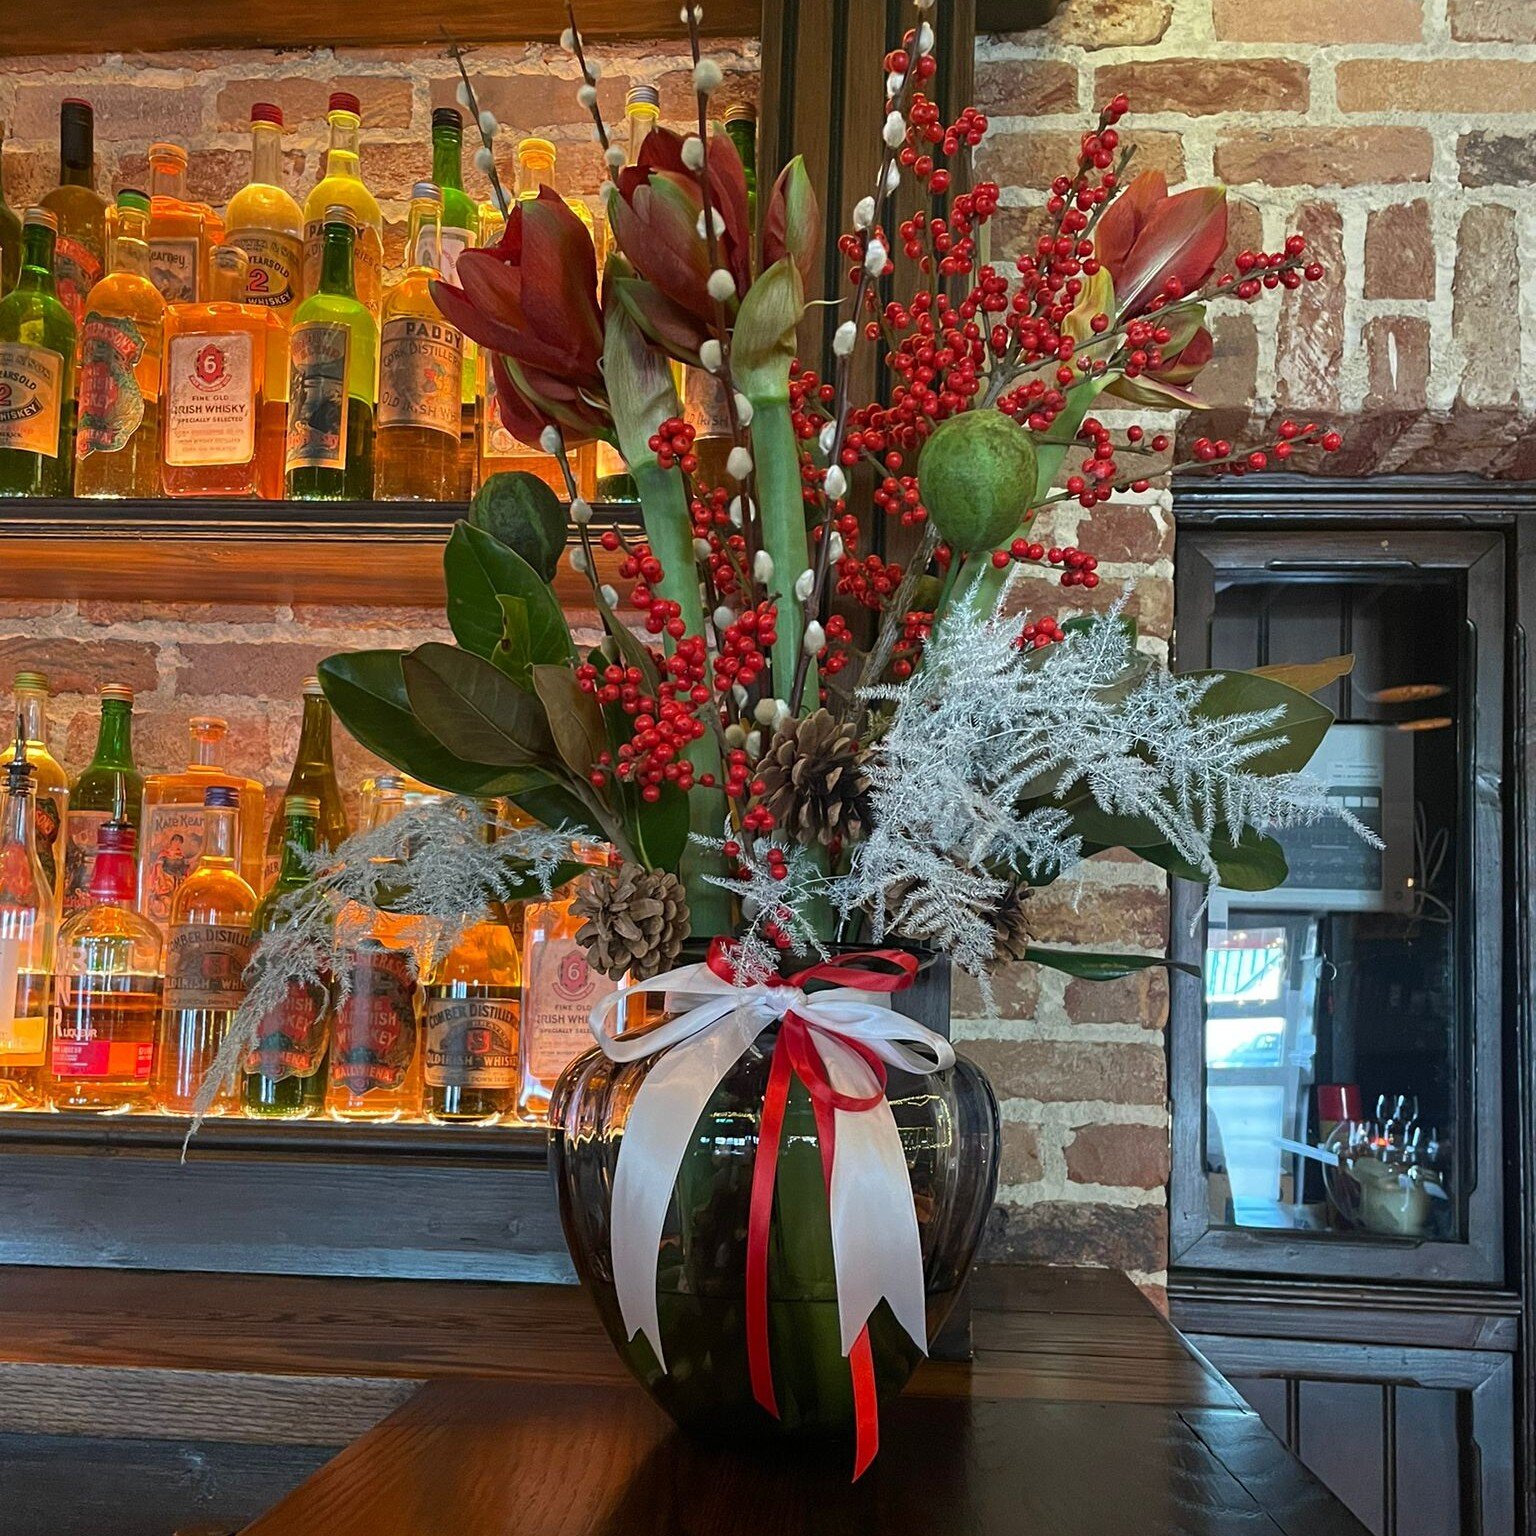 We are delighted with our beautiful Christmas bouquets. Wouldn't you agree the colours are just beautiful!

A big huge thanks to Joe at Main Street Flowers Howth for always providing us with such beautiful fresh flowers.

Happy Christmas to Joe and a